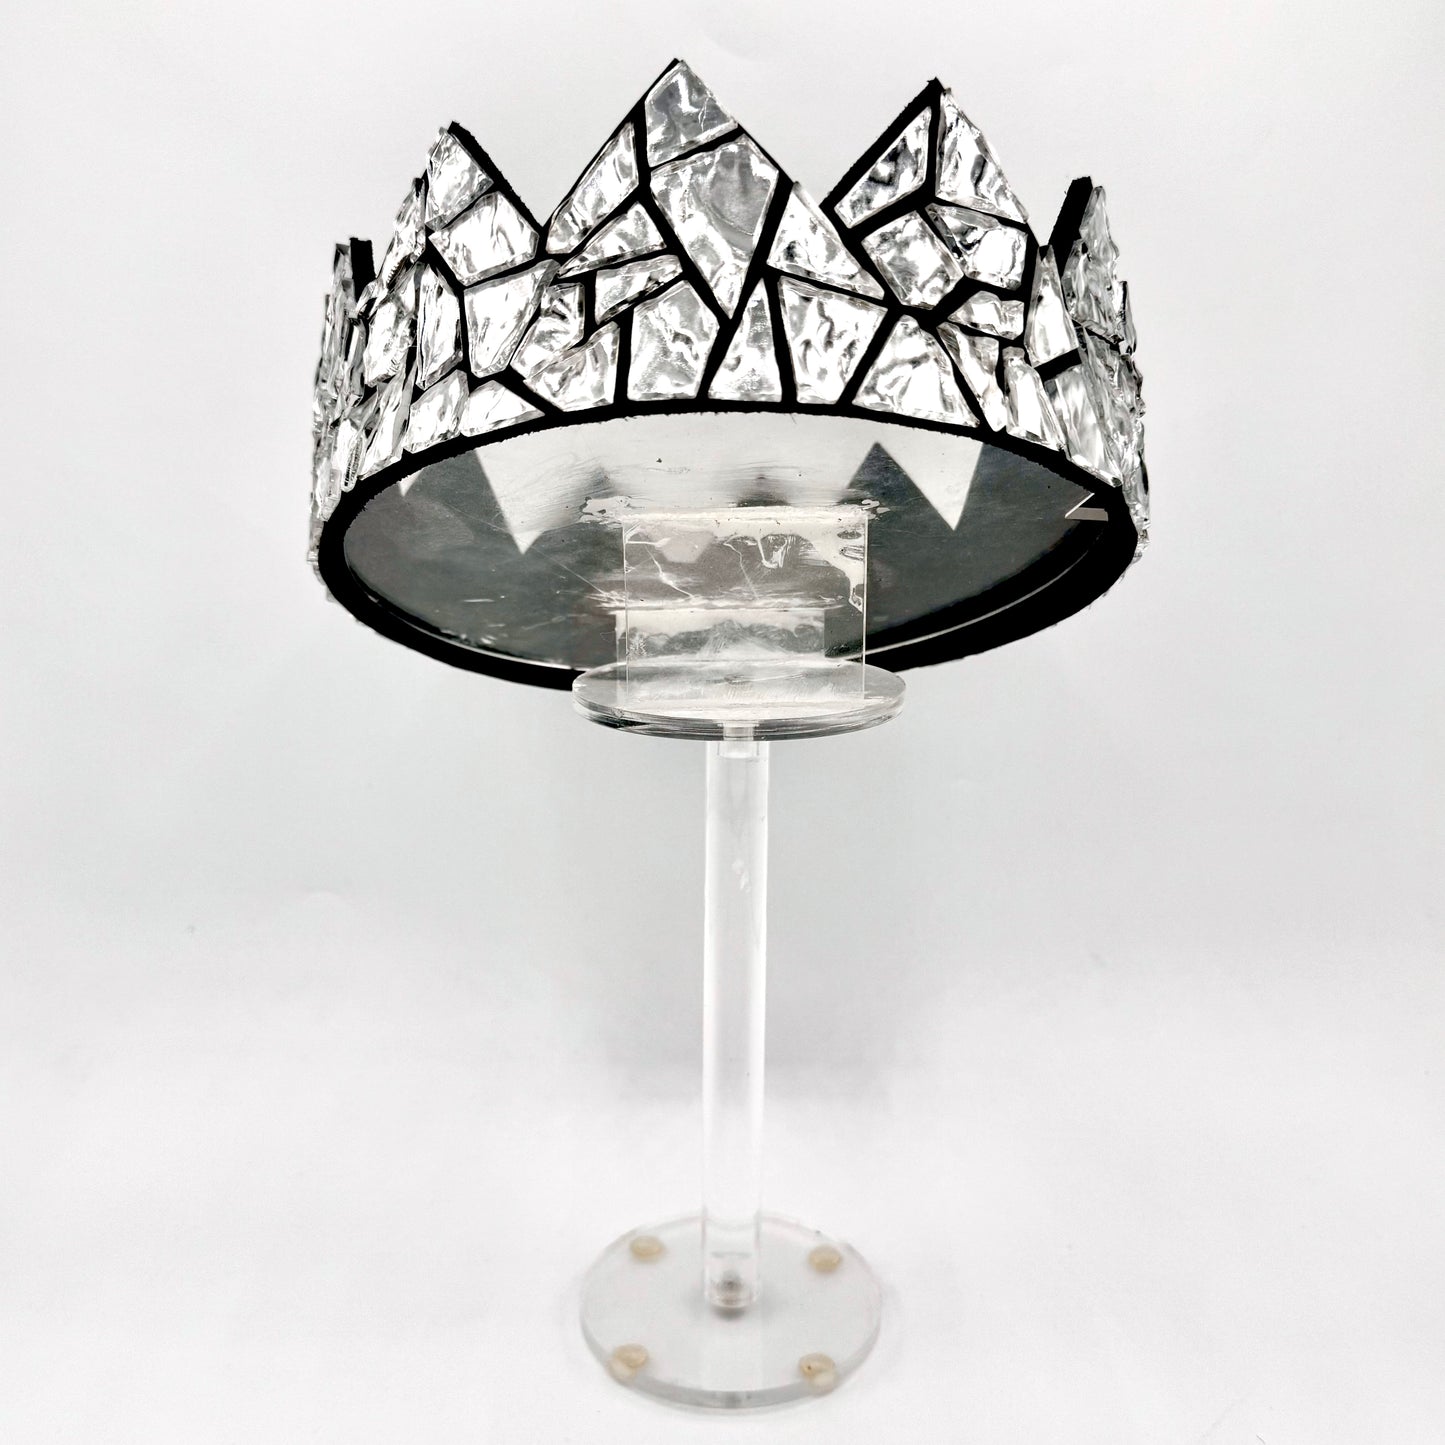 Glacial Texture Silver Crown on Black